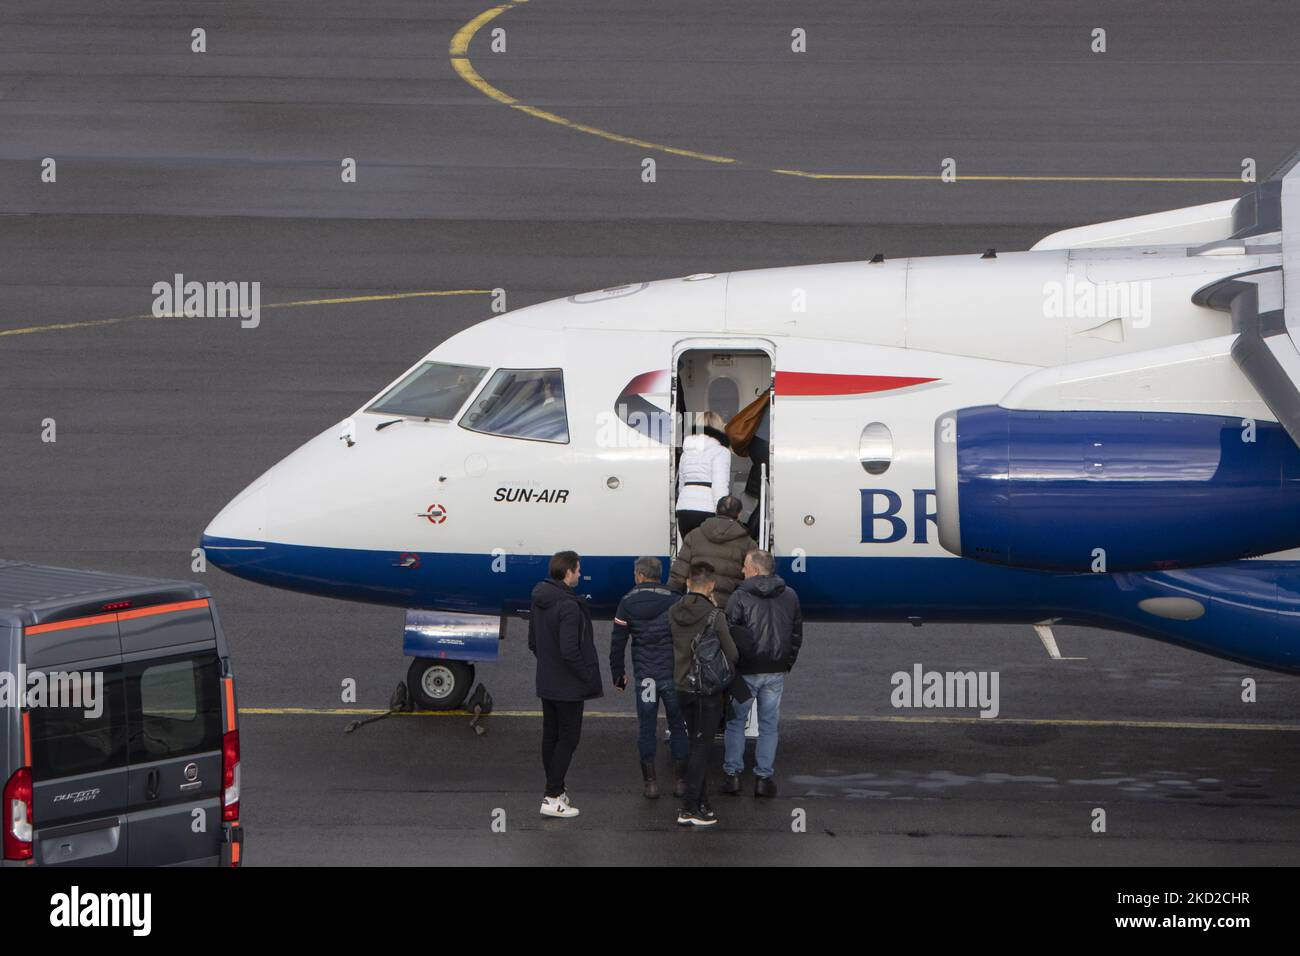 Passenger boarding in the regional airliner. British Airways Dornier Do-328JET-300 aircraft as seen in Eindhoven airport EIN during the taxiing, takeoff, and flying phase departing to Arvidsjaur AJR in Sweden. The Dornier 328 jet edition with registration OY-NCW passenger airplane is a commuter airliner based on the turboprop-powered Dornier 328. SUN-AIR of Scandinavia A/S,[1] usually shortened to SUN-AIR, is a Danish regional airline headquartered in Billund, with its main base at Billund Airport. It operates scheduled services as a franchise of British Airways using their name and corporate  Stock Photo